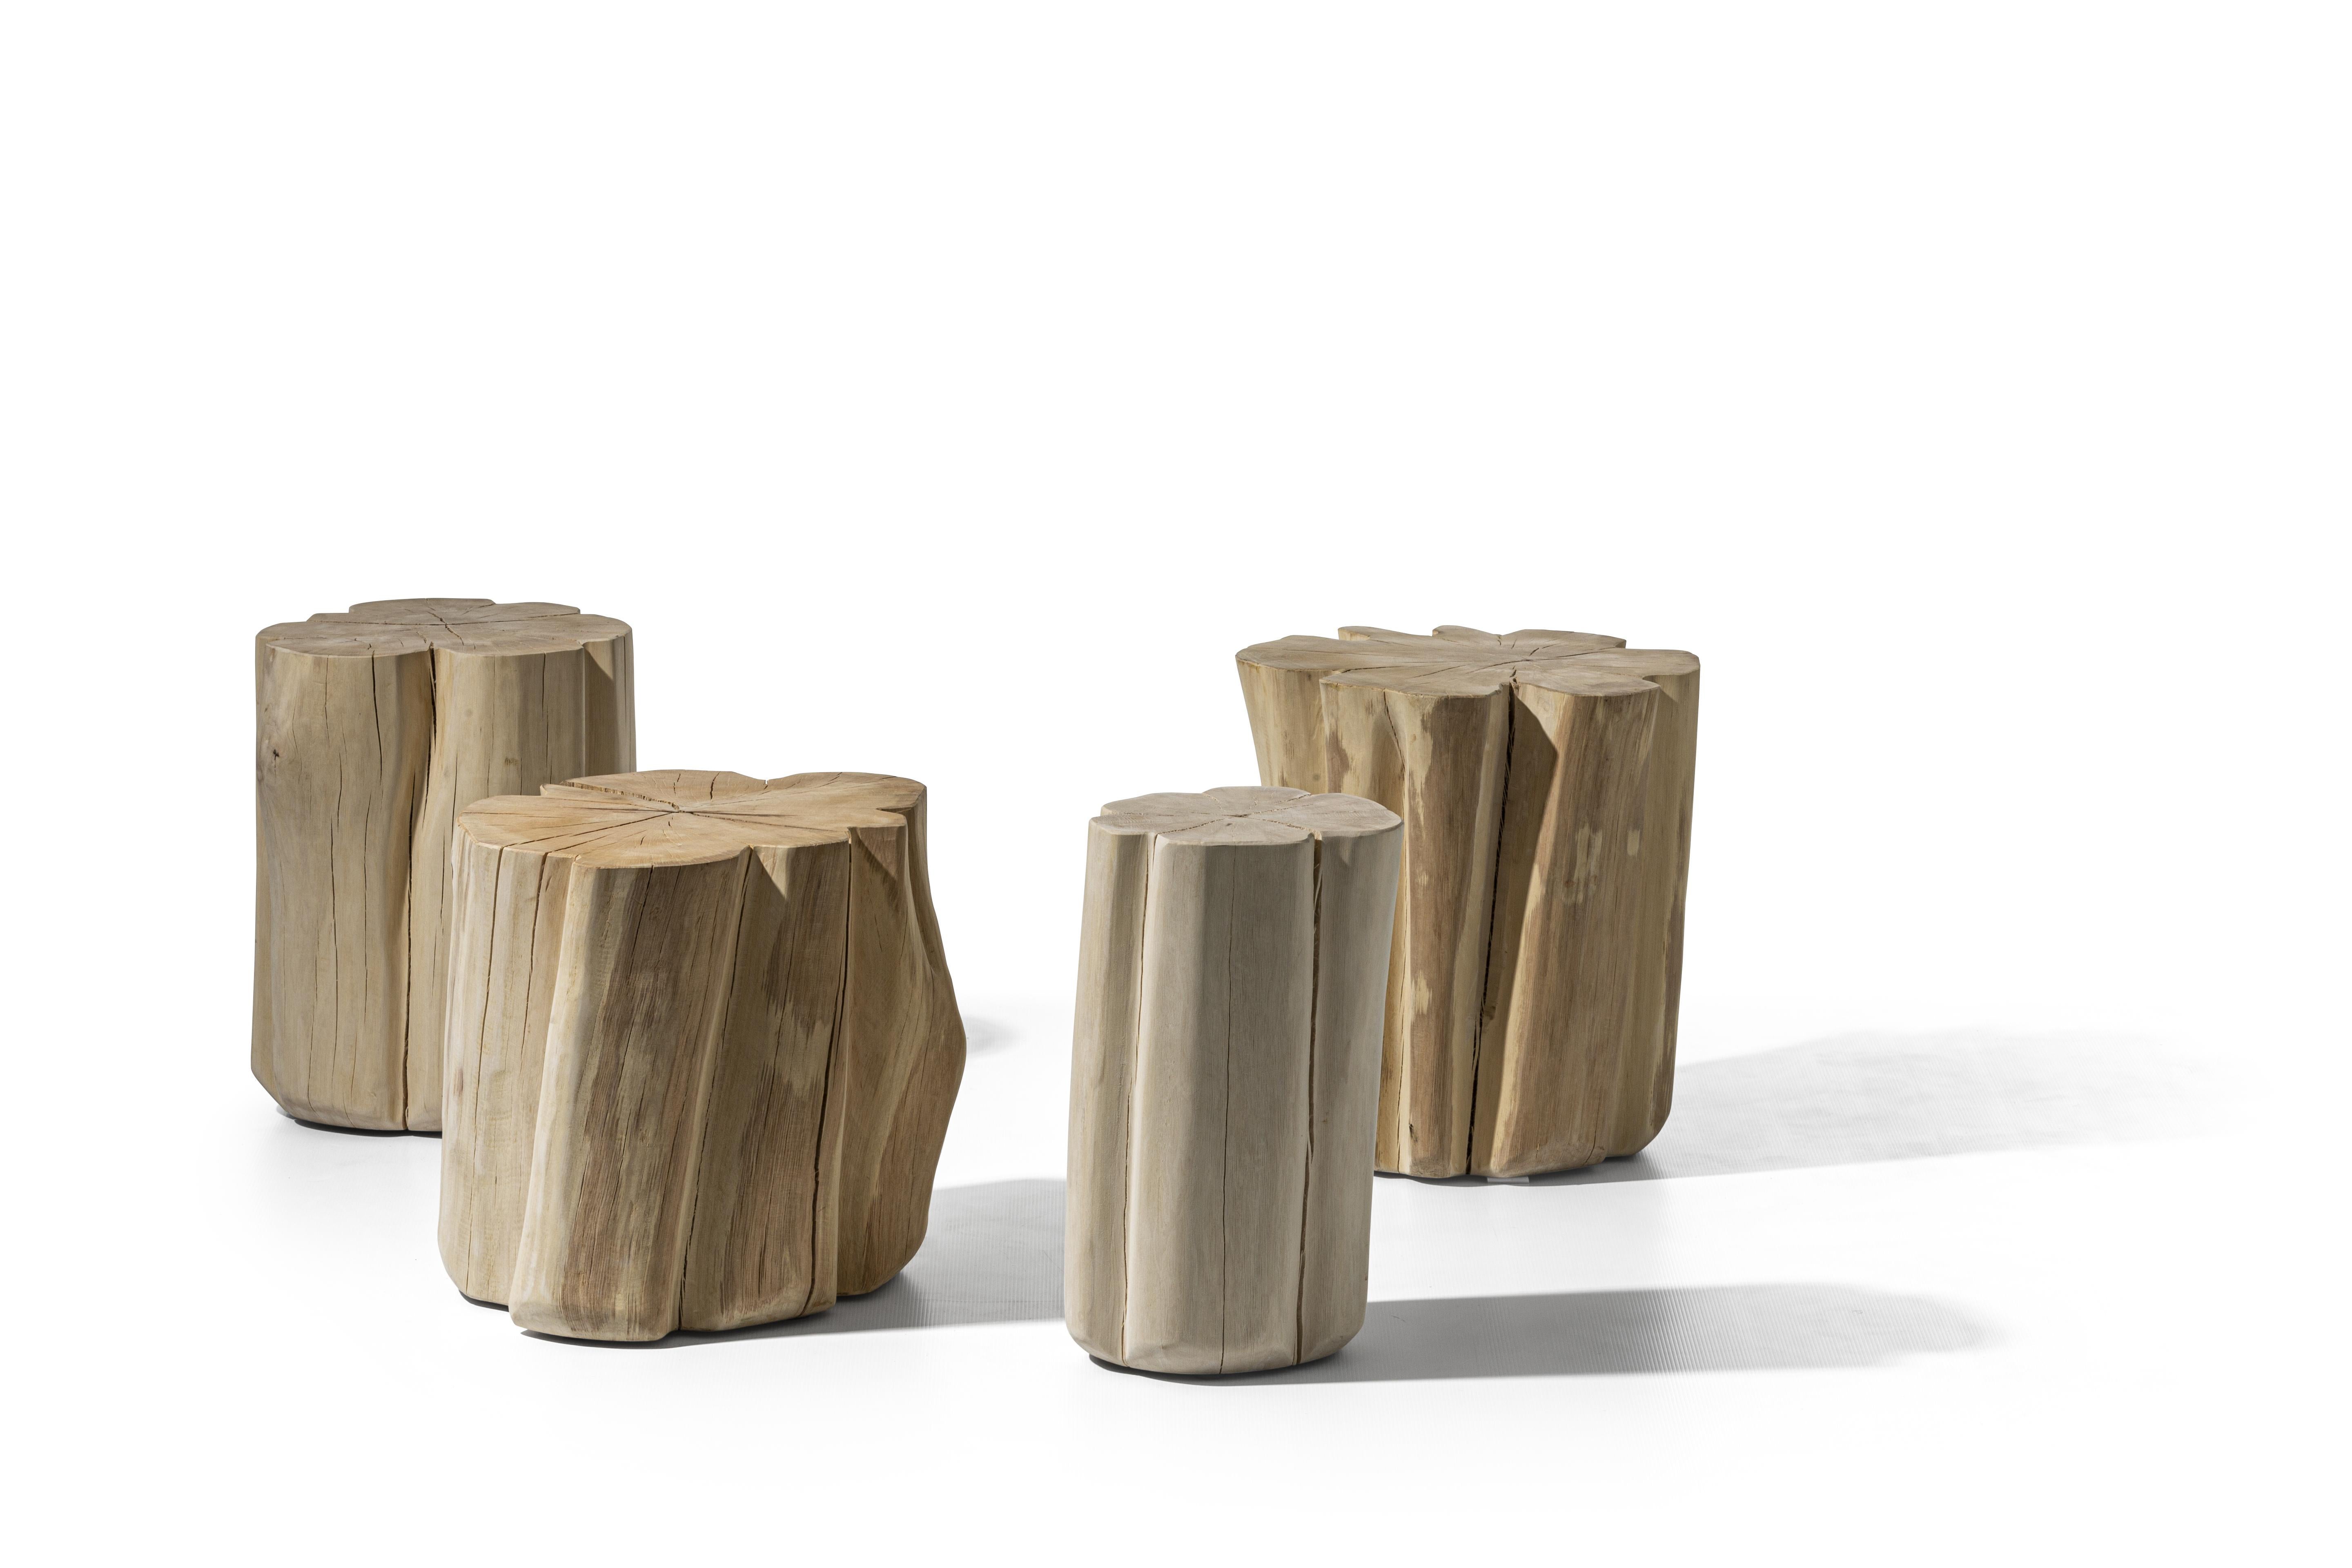 A family of poufs with Nordic suggestions, Brick XS/S/M/L are made from a section of debarked hornbeam trunk. Available in different heights and diameters, these are products with a contemporary charm, which aim to enhance the naturalness of wood.